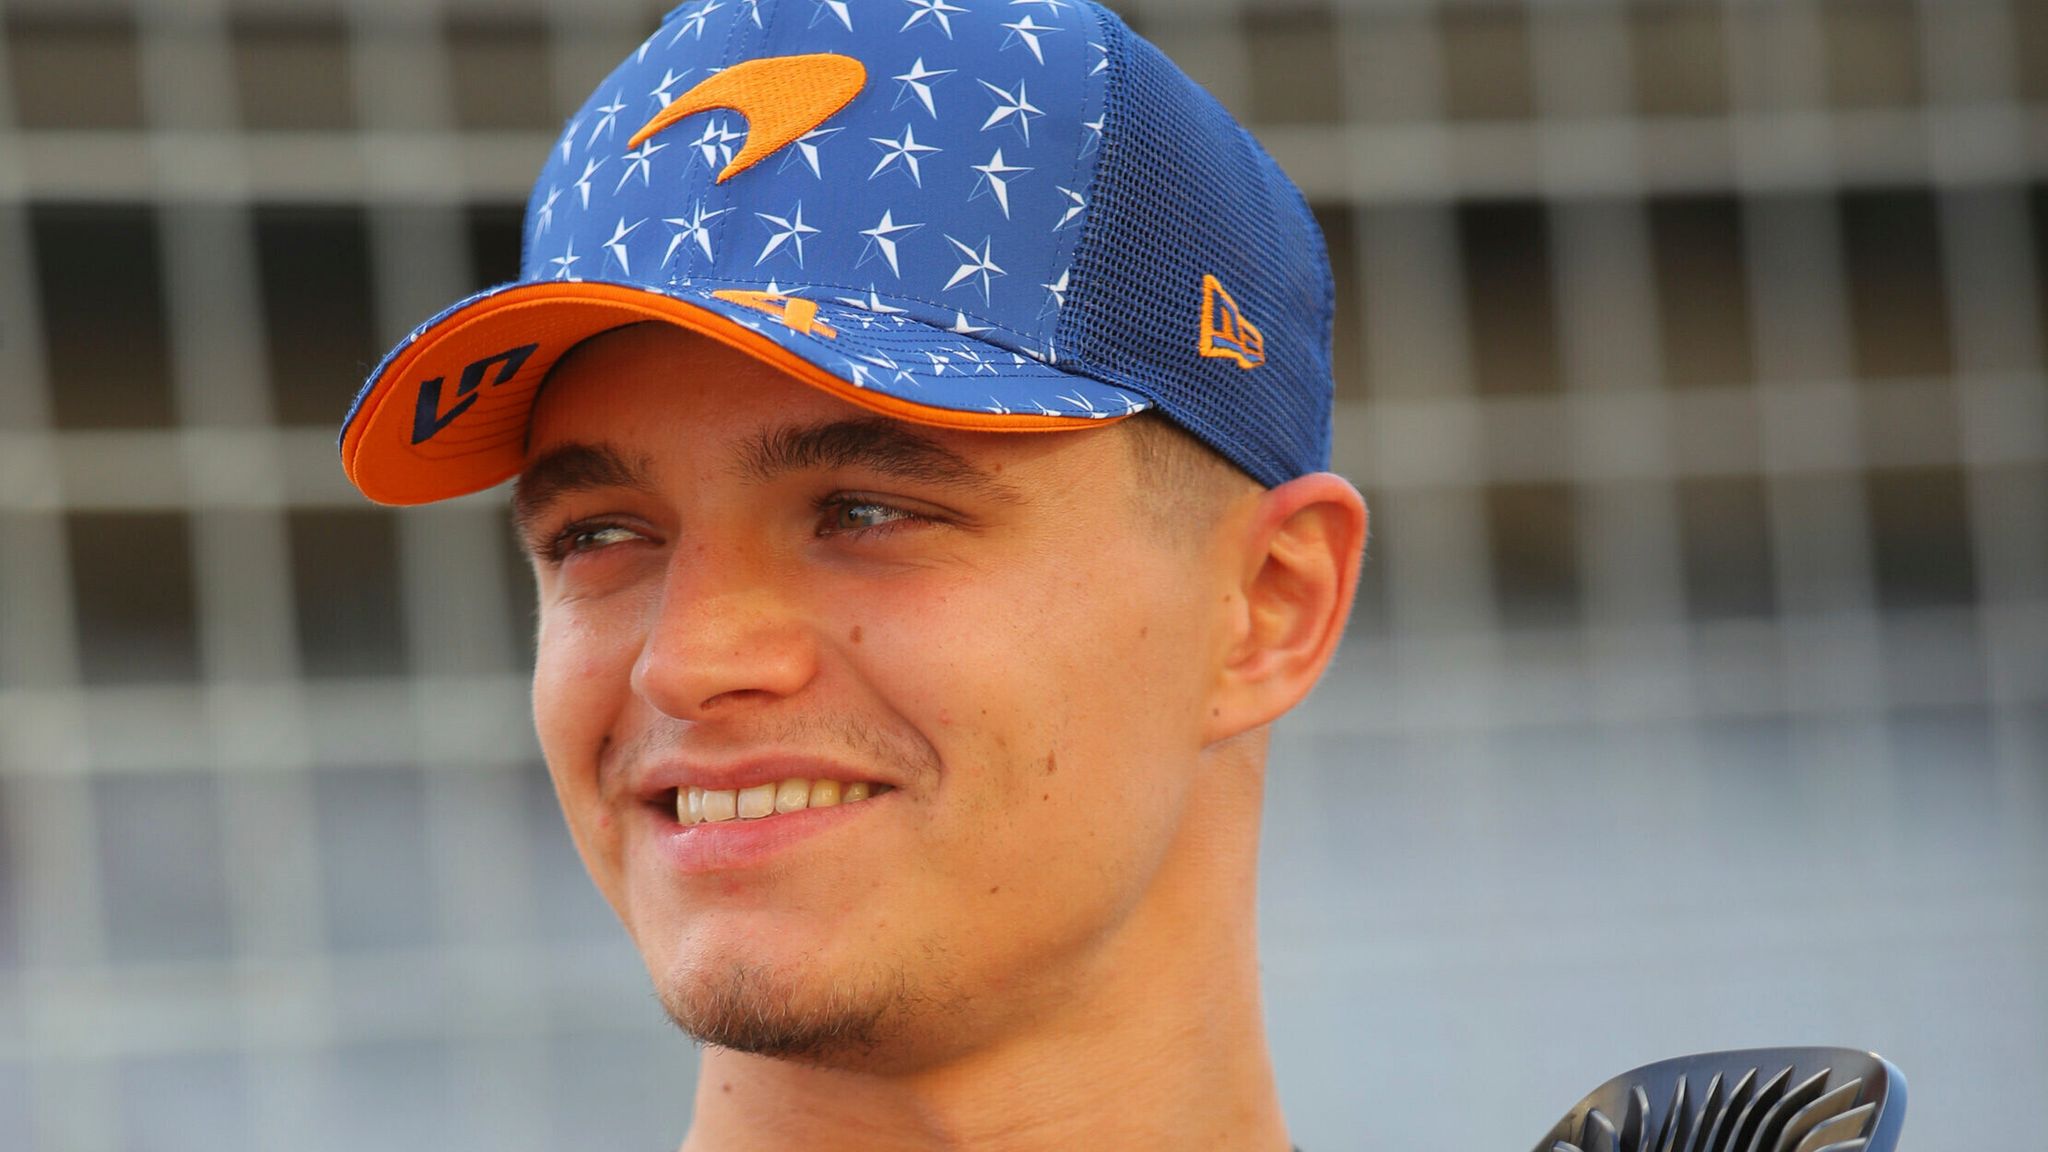 Lando Norris Stats, Race Results, Wins, News, Record, Videos, Pictures, Bio  in, Formula One - ESPN